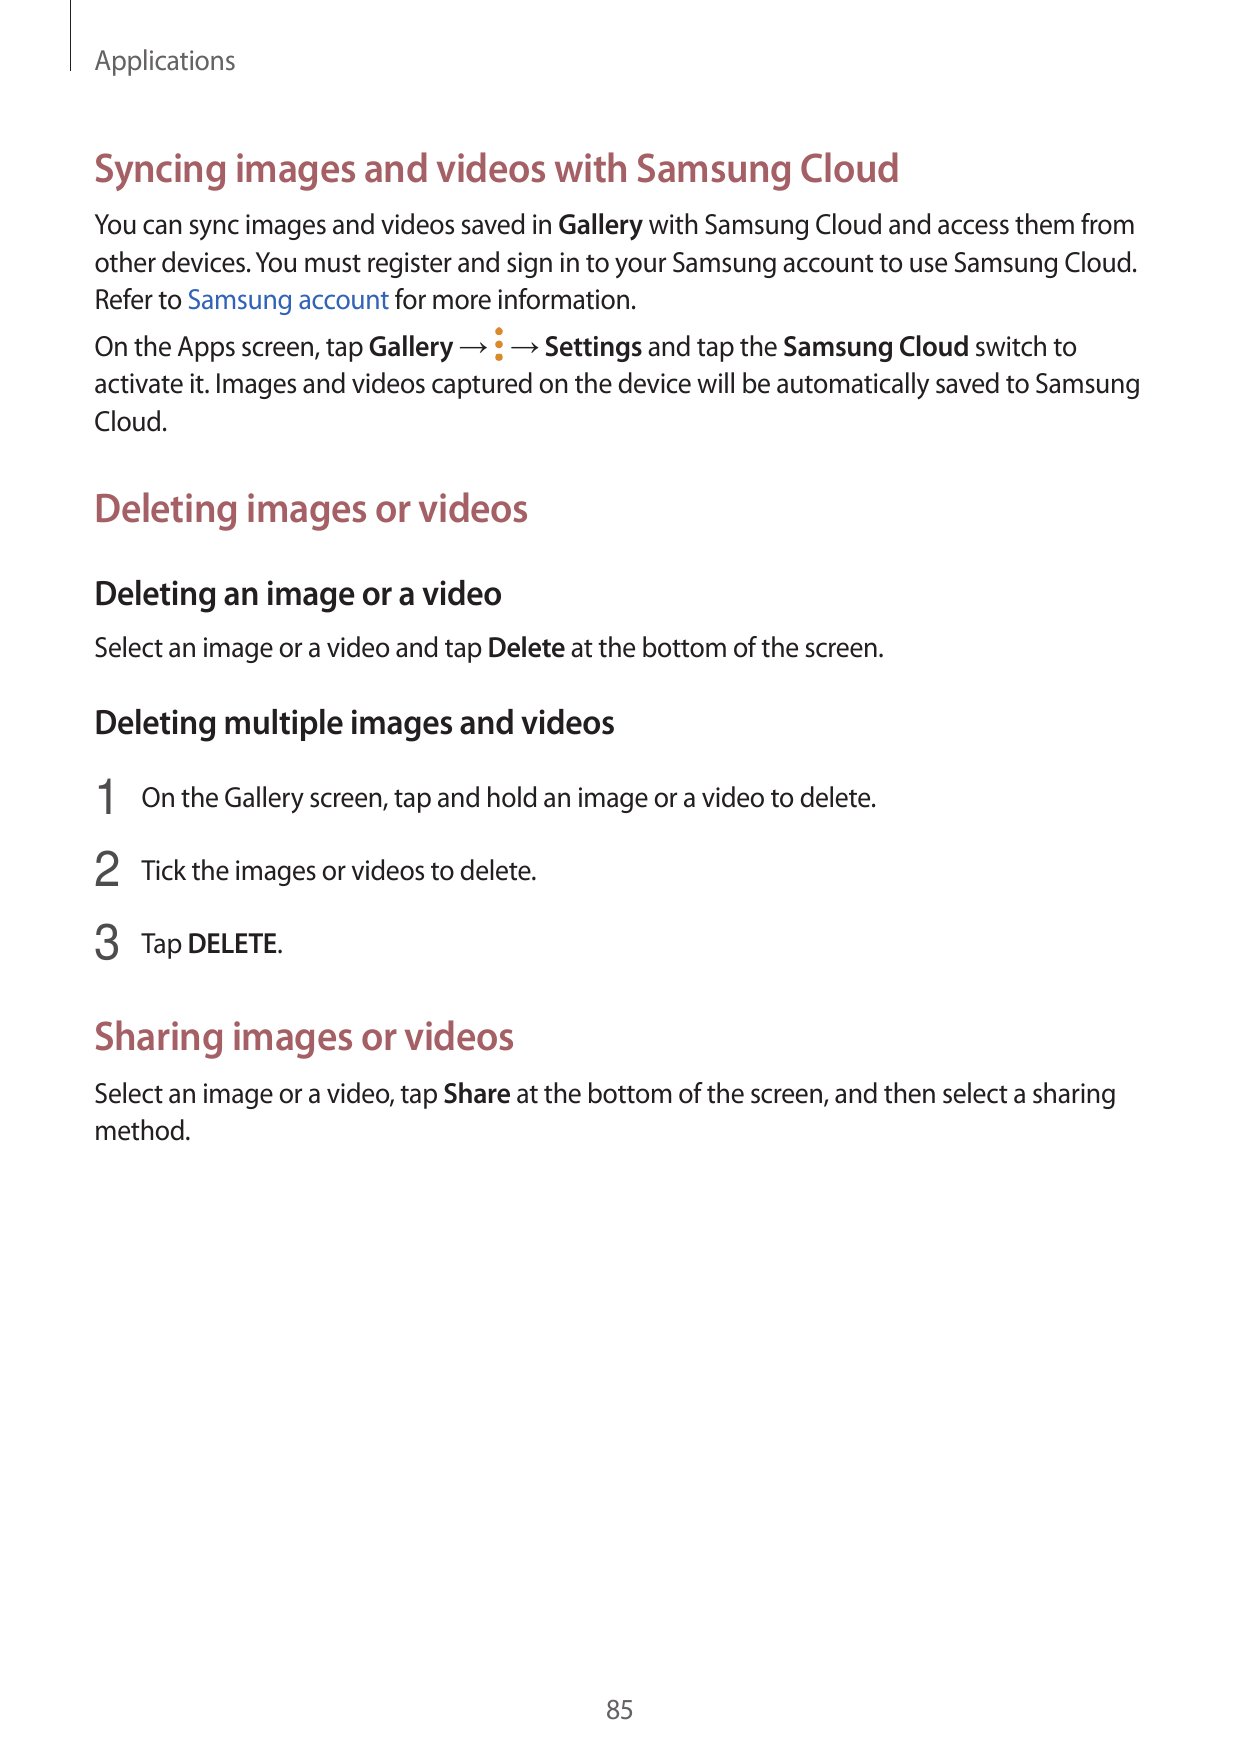 ApplicationsSyncing images and videos with Samsung CloudYou can sync images and videos saved in Gallery with Samsung Cloud and a